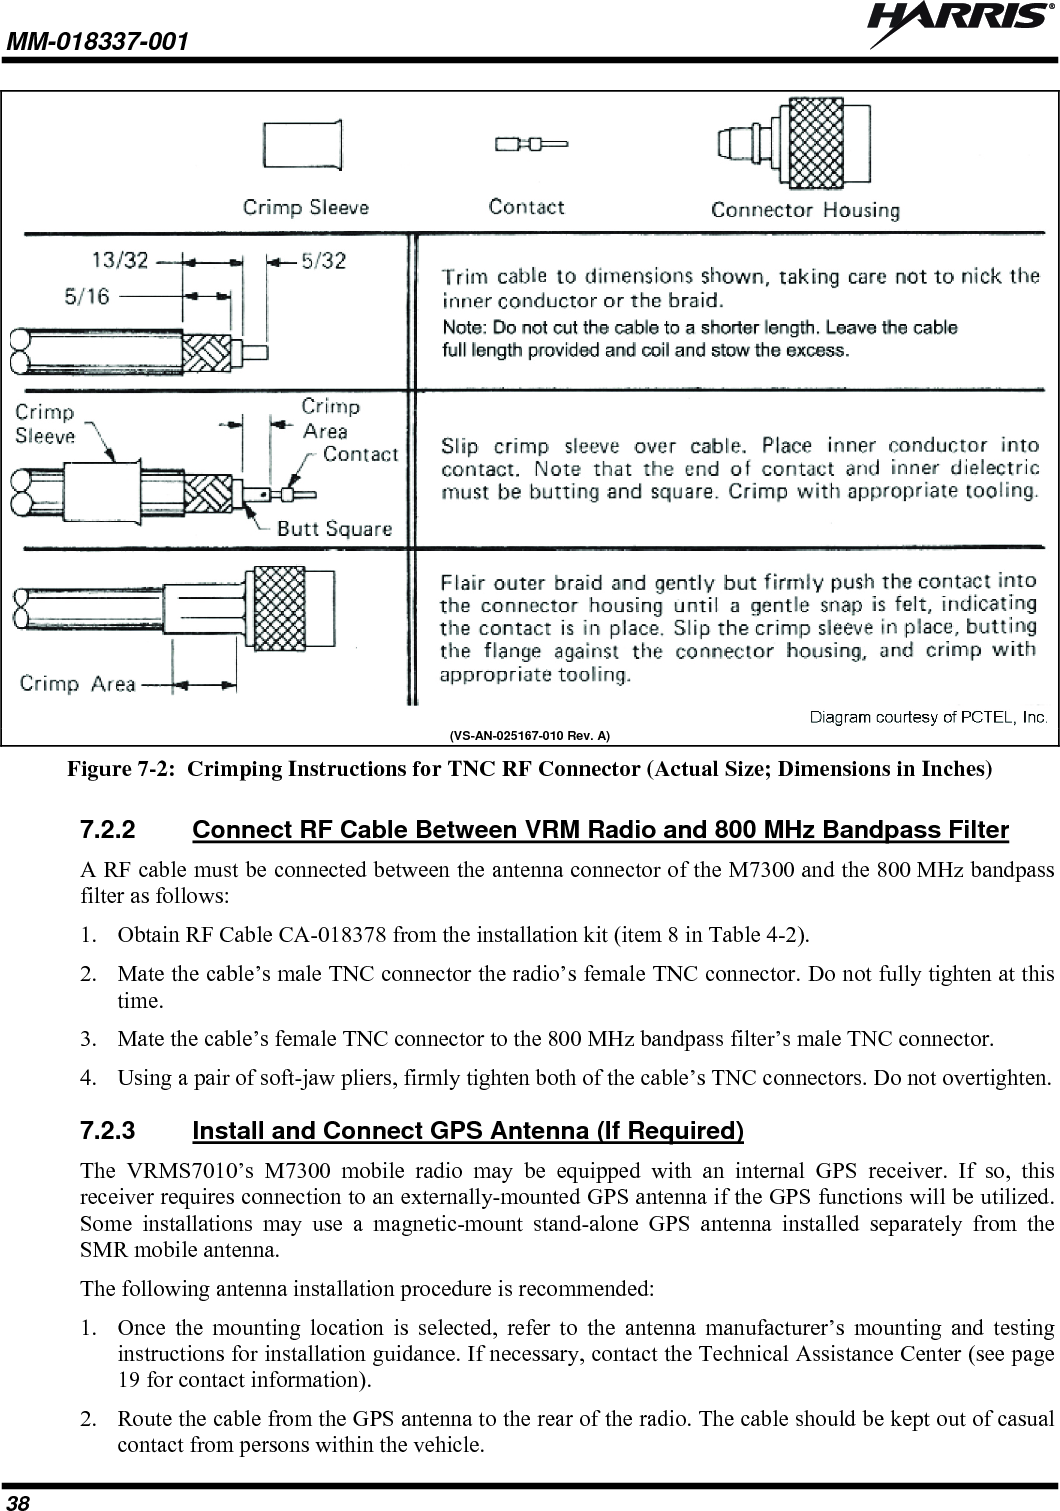 MM-018337-001   38  (VS-AN-025167-010 Rev. A) Figure 7-2:  Crimping Instructions for TNC RF Connector (Actual Size; Dimensions in Inches) 7.2.2  Connect RF Cable Between VRM Radio and 800 MHz Bandpass Filter A RF cable must be connected between the antenna connector of the M7300 and the 800 MHz bandpass filter as follows: 1. Obtain RF Cable CA-018378 from the installation kit (item 8 in Table 4-2). 2. Mate the cable’s male TNC connector the radio’s female TNC connector. Do not fully tighten at this time. 3. Mate the cable’s female TNC connector to the 800 MHz bandpass filter’s male TNC connector. 4. Using a pair of soft-jaw pliers, firmly tighten both of the cable’s TNC connectors. Do not overtighten. 7.2.3  Install and Connect GPS Antenna (If Required) The VRMS7010’s M7300 mobile radio may be equipped with an internal GPS receiver. If so, this receiver requires connection to an externally-mounted GPS antenna if the GPS functions will be utilized. Some installations may use a magnetic-mount stand-alone GPS antenna installed separately from the SMR mobile antenna. The following antenna installation procedure is recommended: 1. Once the mounting location is selected, refer to the antenna manufacturer’s mounting and testing instructions for installation guidance. If necessary, contact the Technical Assistance Center (see page 19 for contact information). 2. Route the cable from the GPS antenna to the rear of the radio. The cable should be kept out of casual contact from persons within the vehicle. 